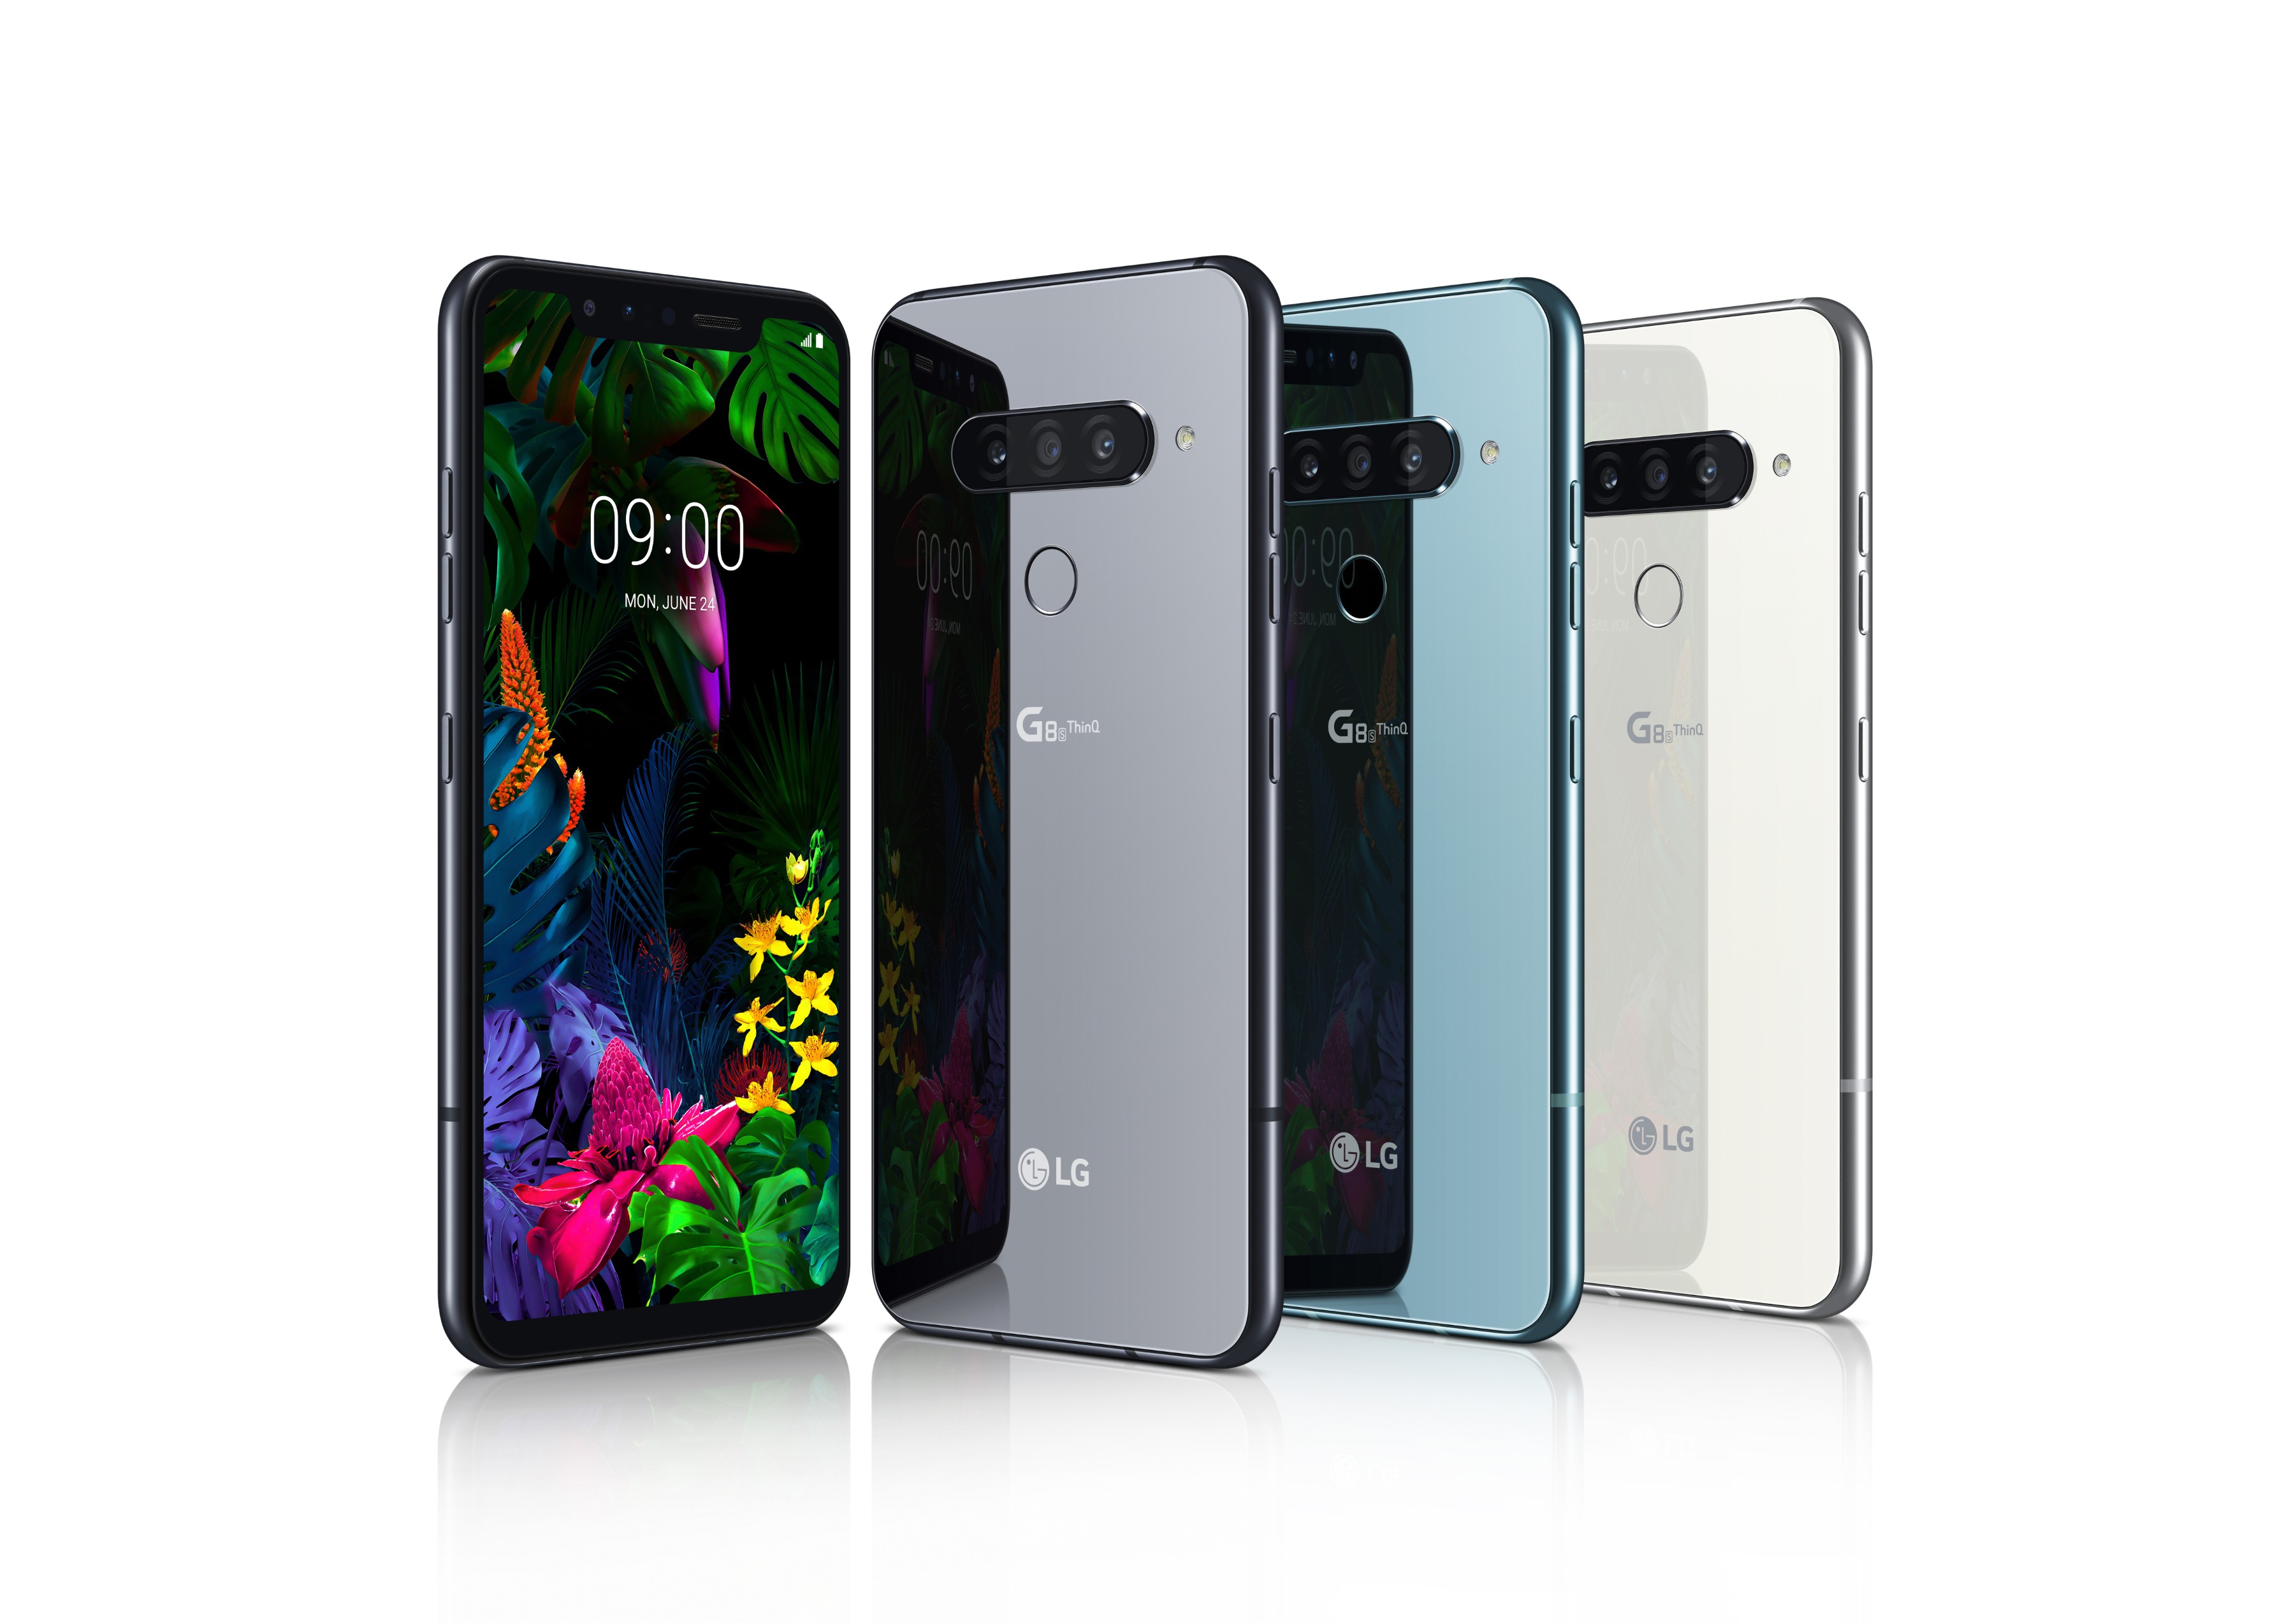 LG G8S THINQ COMBINES BEST OF G SERIES WITH FEATURES POPULAR AMONG 